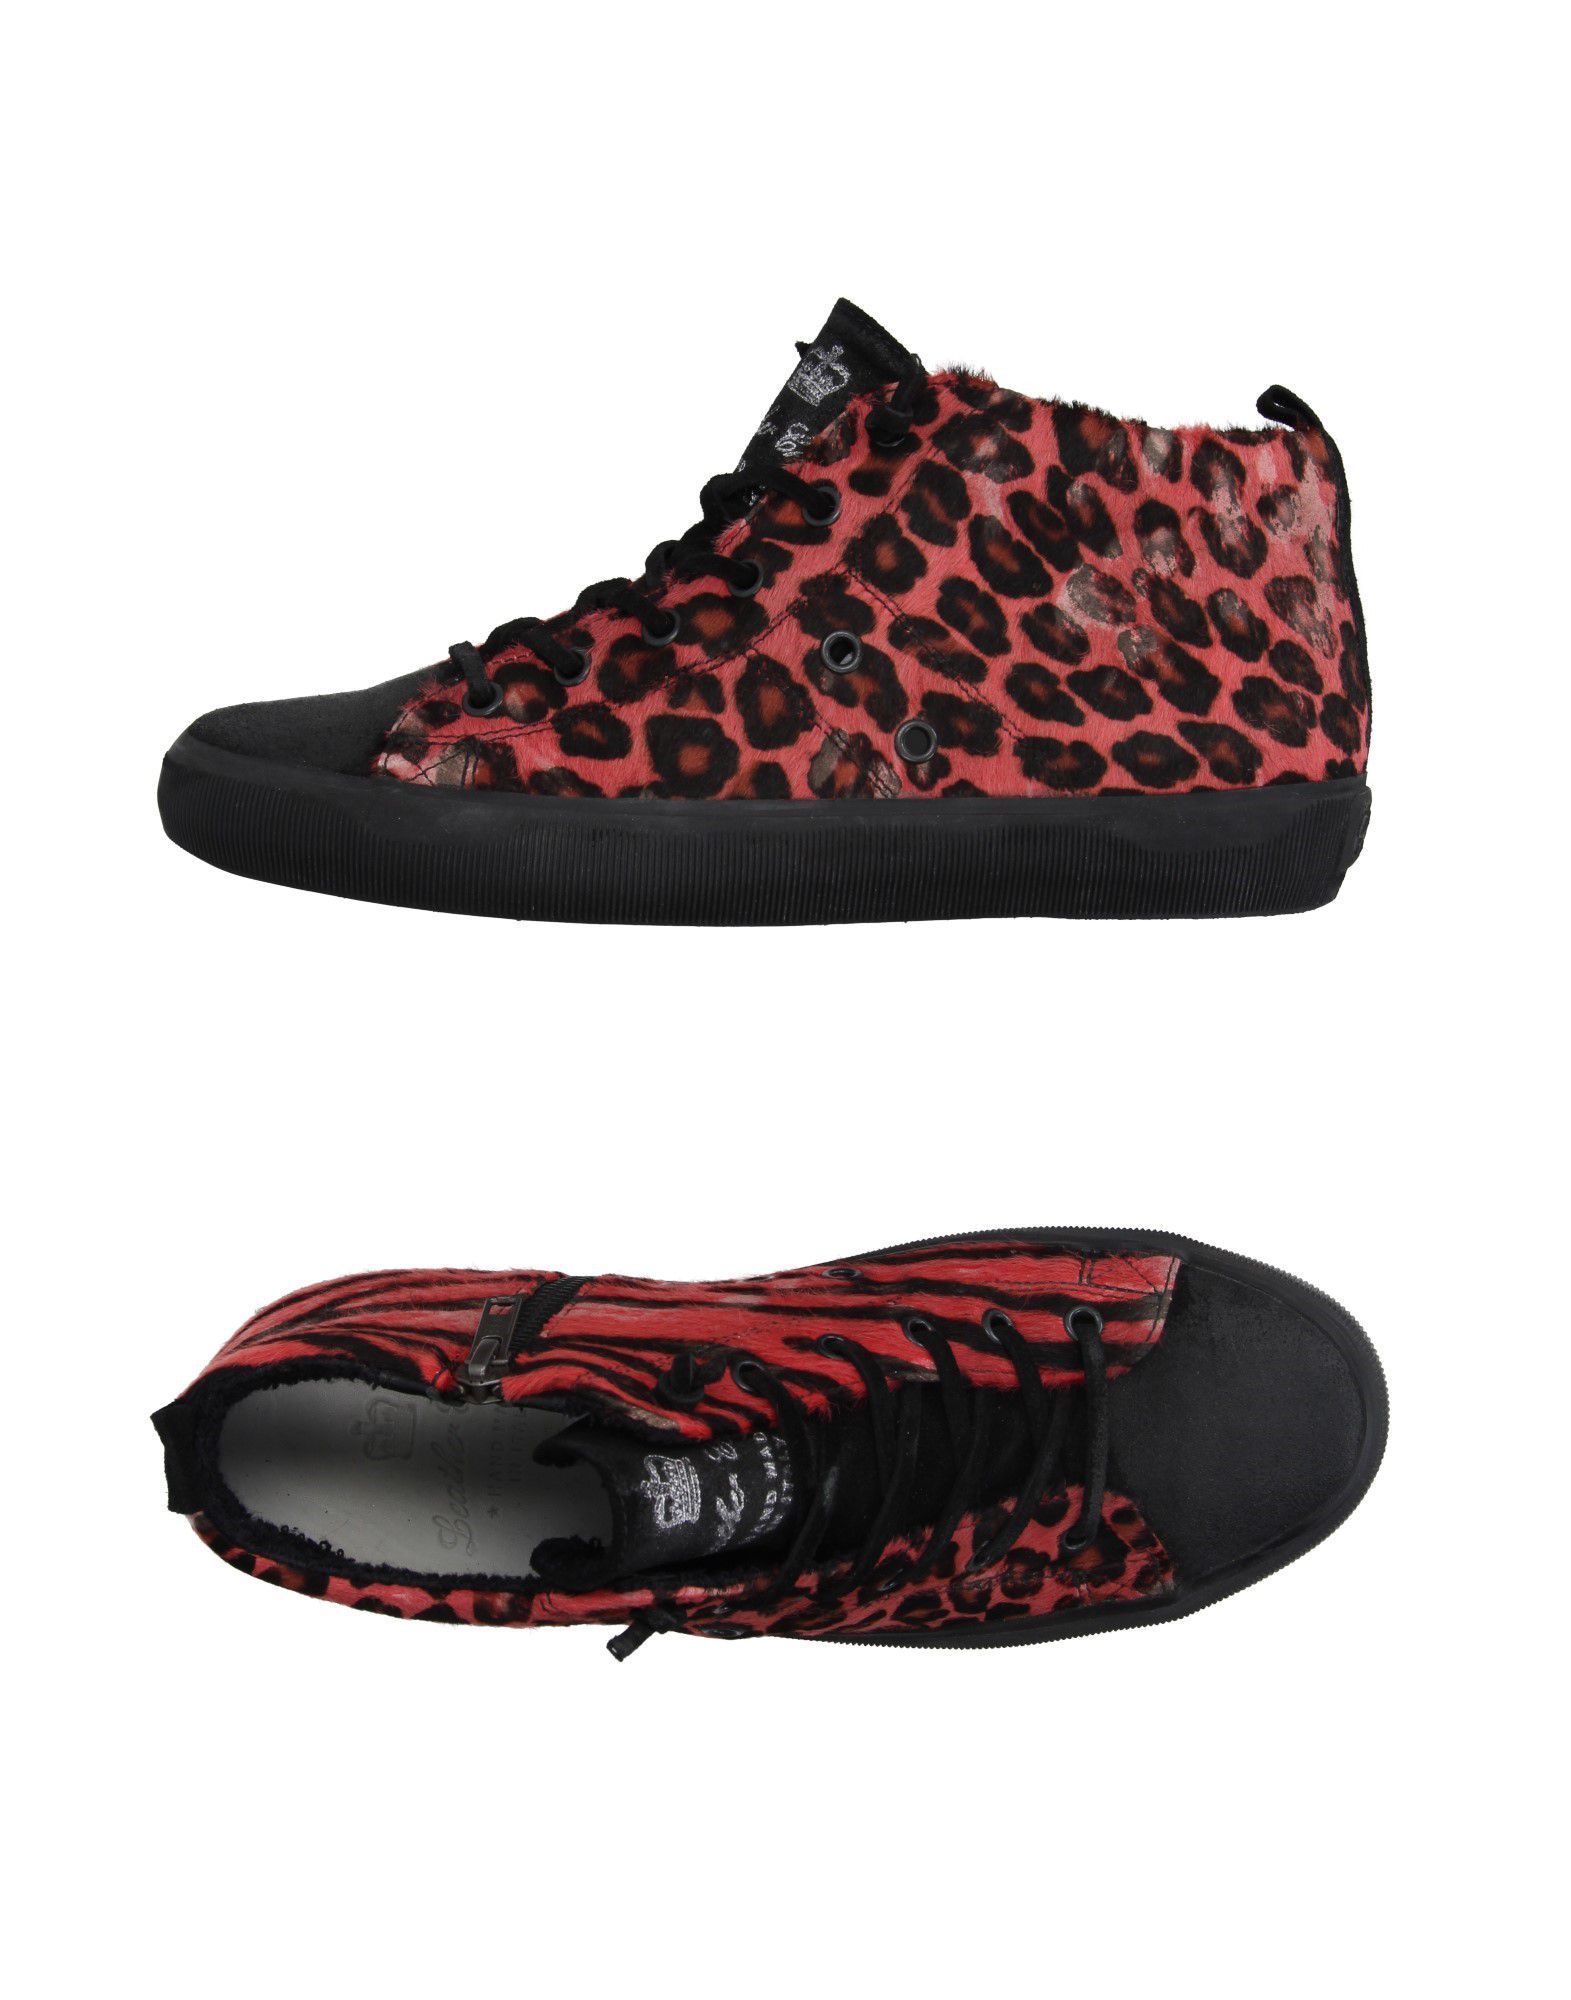 calf hair, lacing, logo, leopard design, zip closure, round toeline, leather lining, rubber sole, flat, contains non-textile parts of animal origin